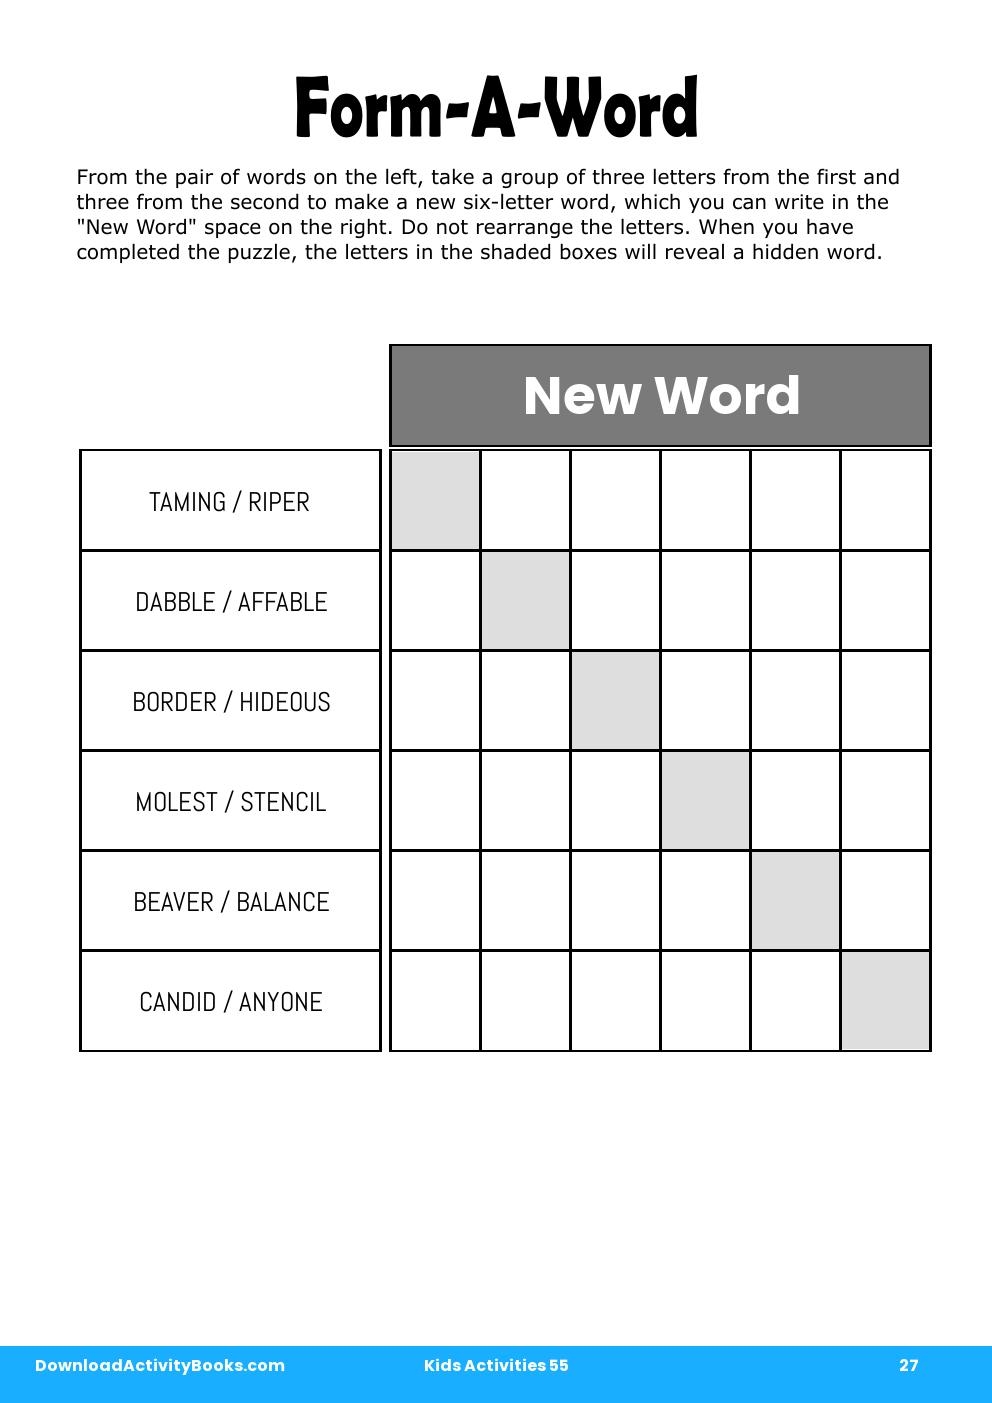 Form-A-Word in Kids Activities 55